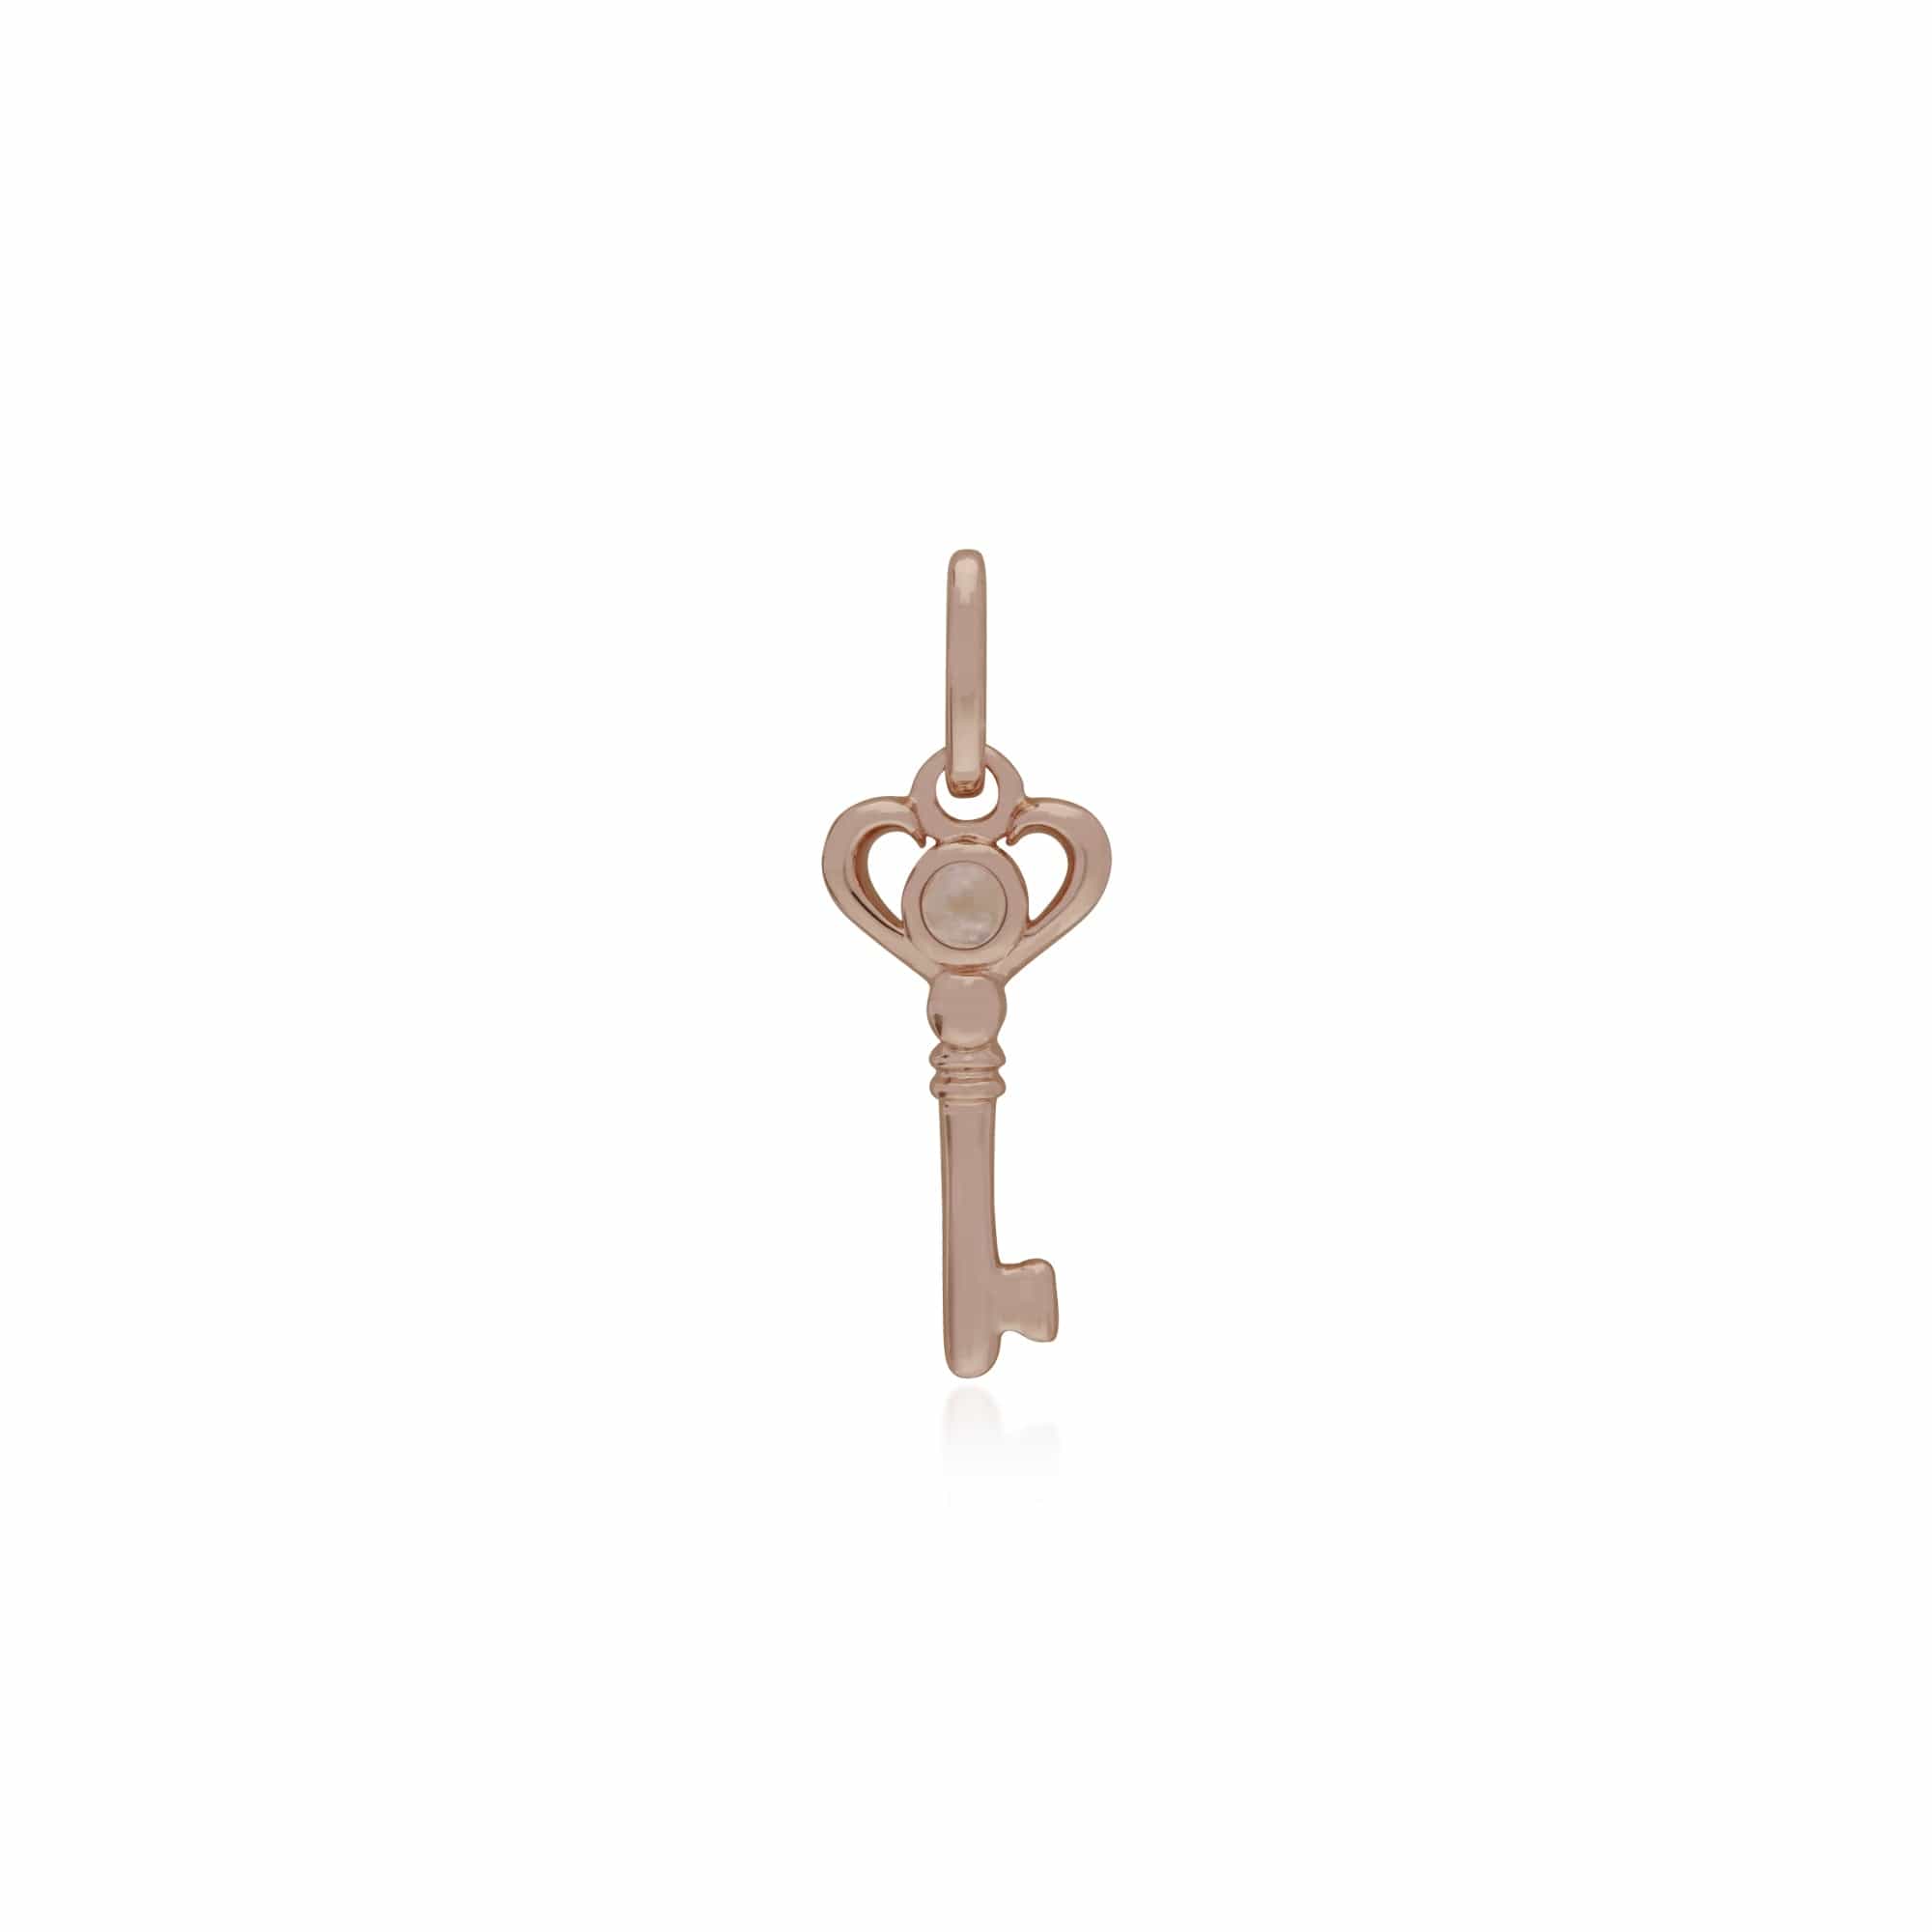 270P028601925-270P026501925 Classic Swirl Heart Lock Pendant & Rainbow Moonstone Key Charm in Rose Gold Plated 925 Sterling Silver 2